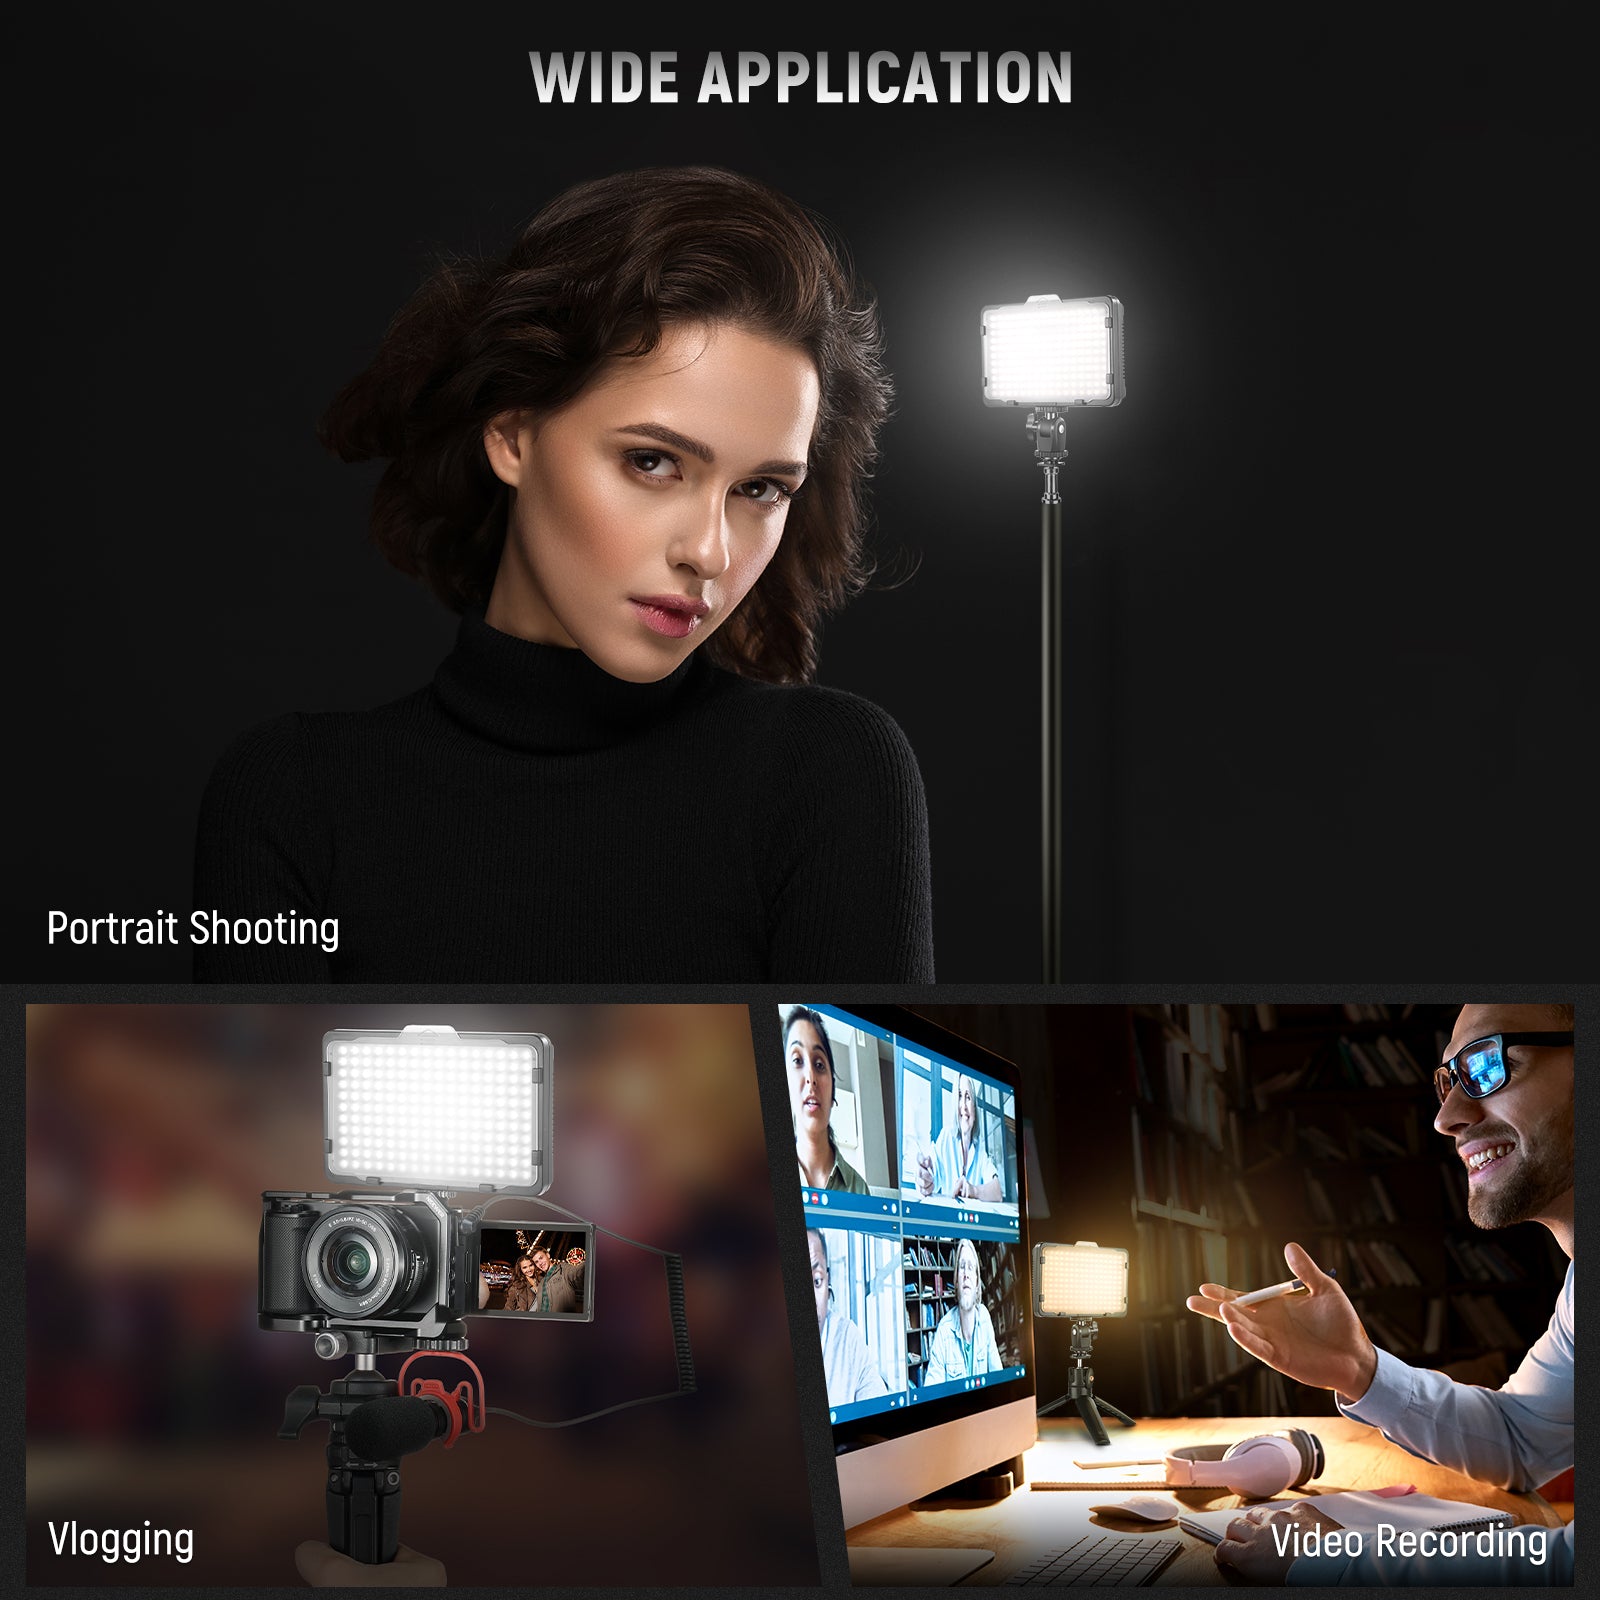 Neewer LED Video Light Kit with 190cm Light Stand, 2-Pack Dimmable